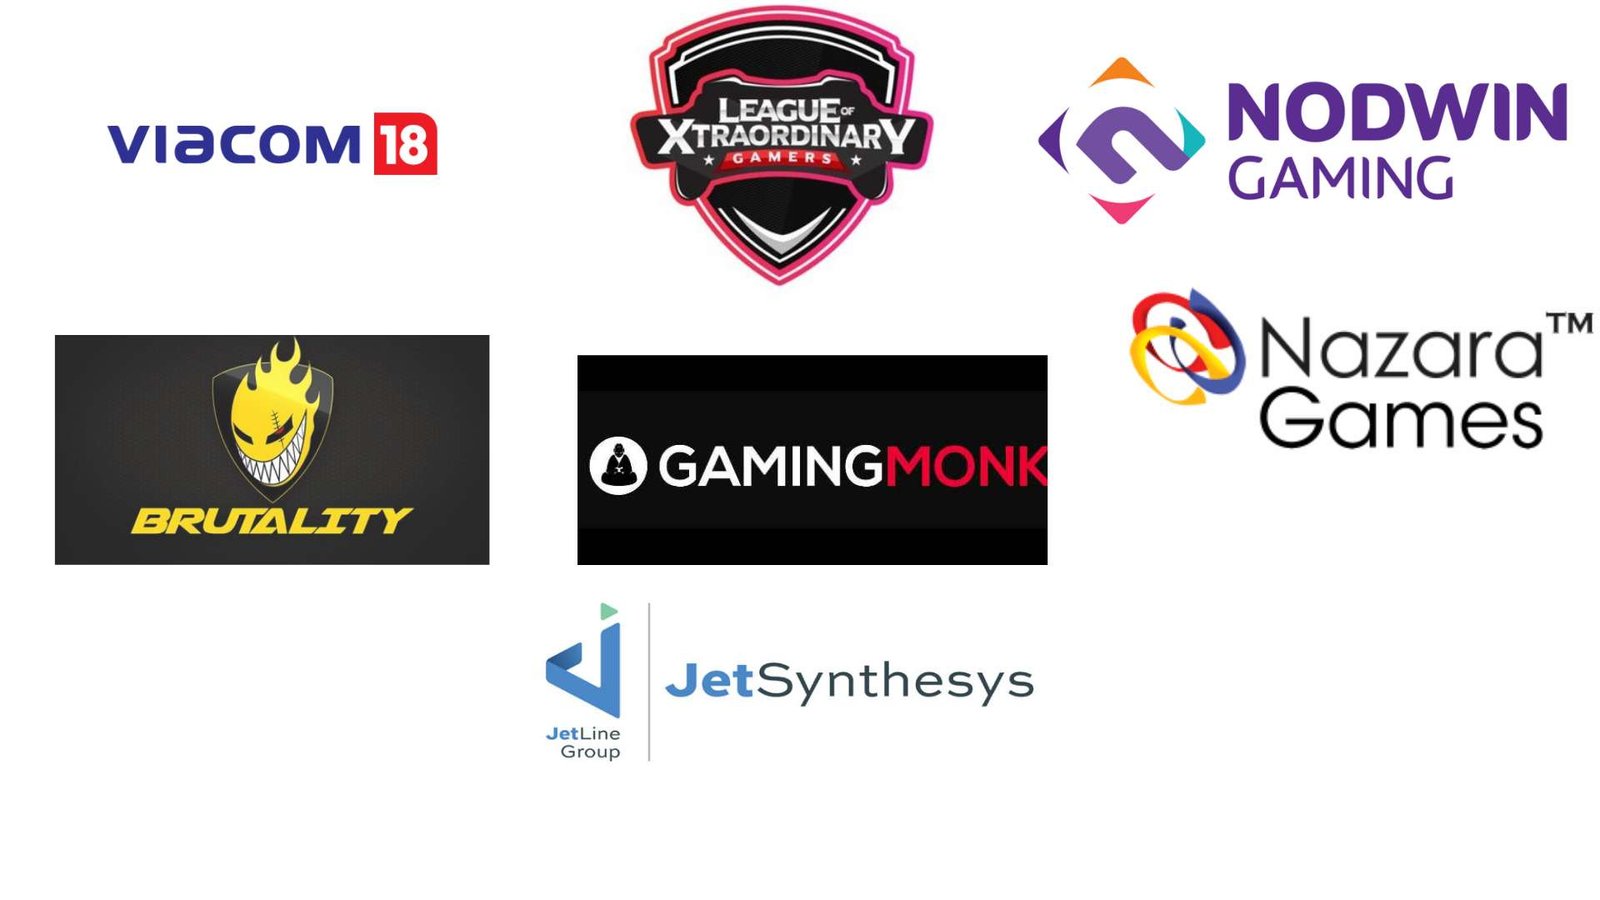 Most Popular ESports Gaming Campanies in India 2022